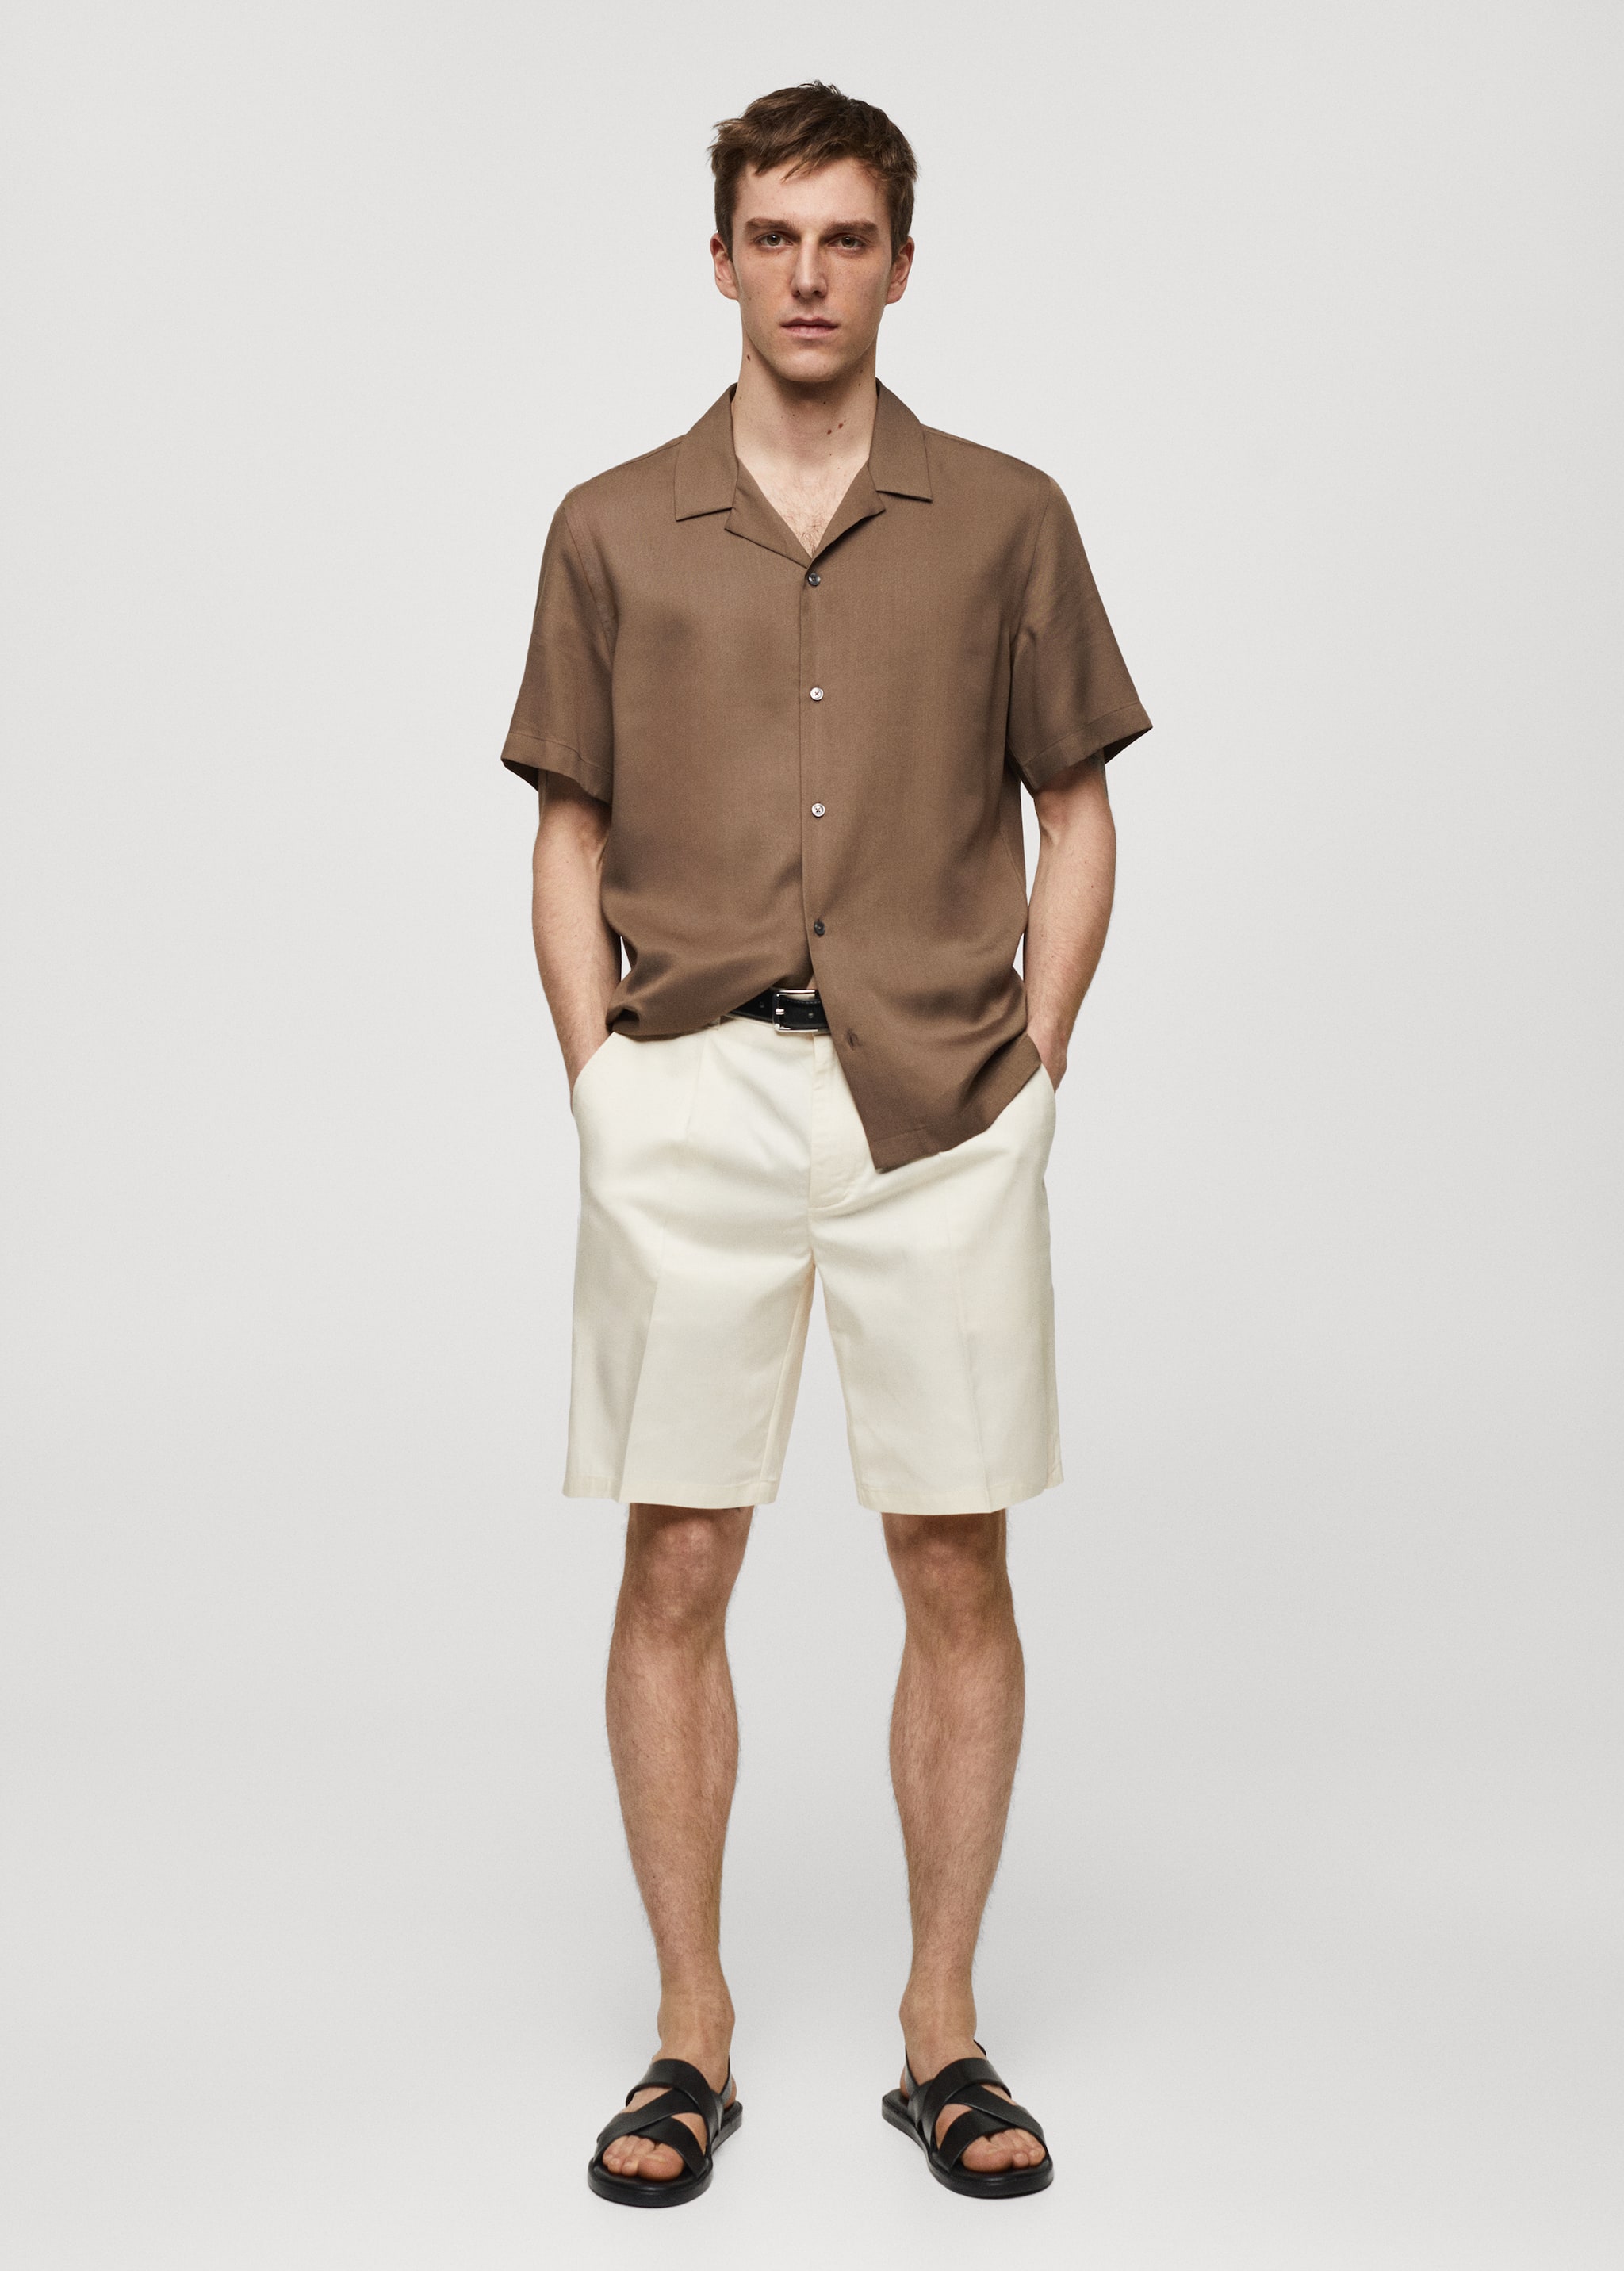 Regular-fit shirt with bowling neck - General plane